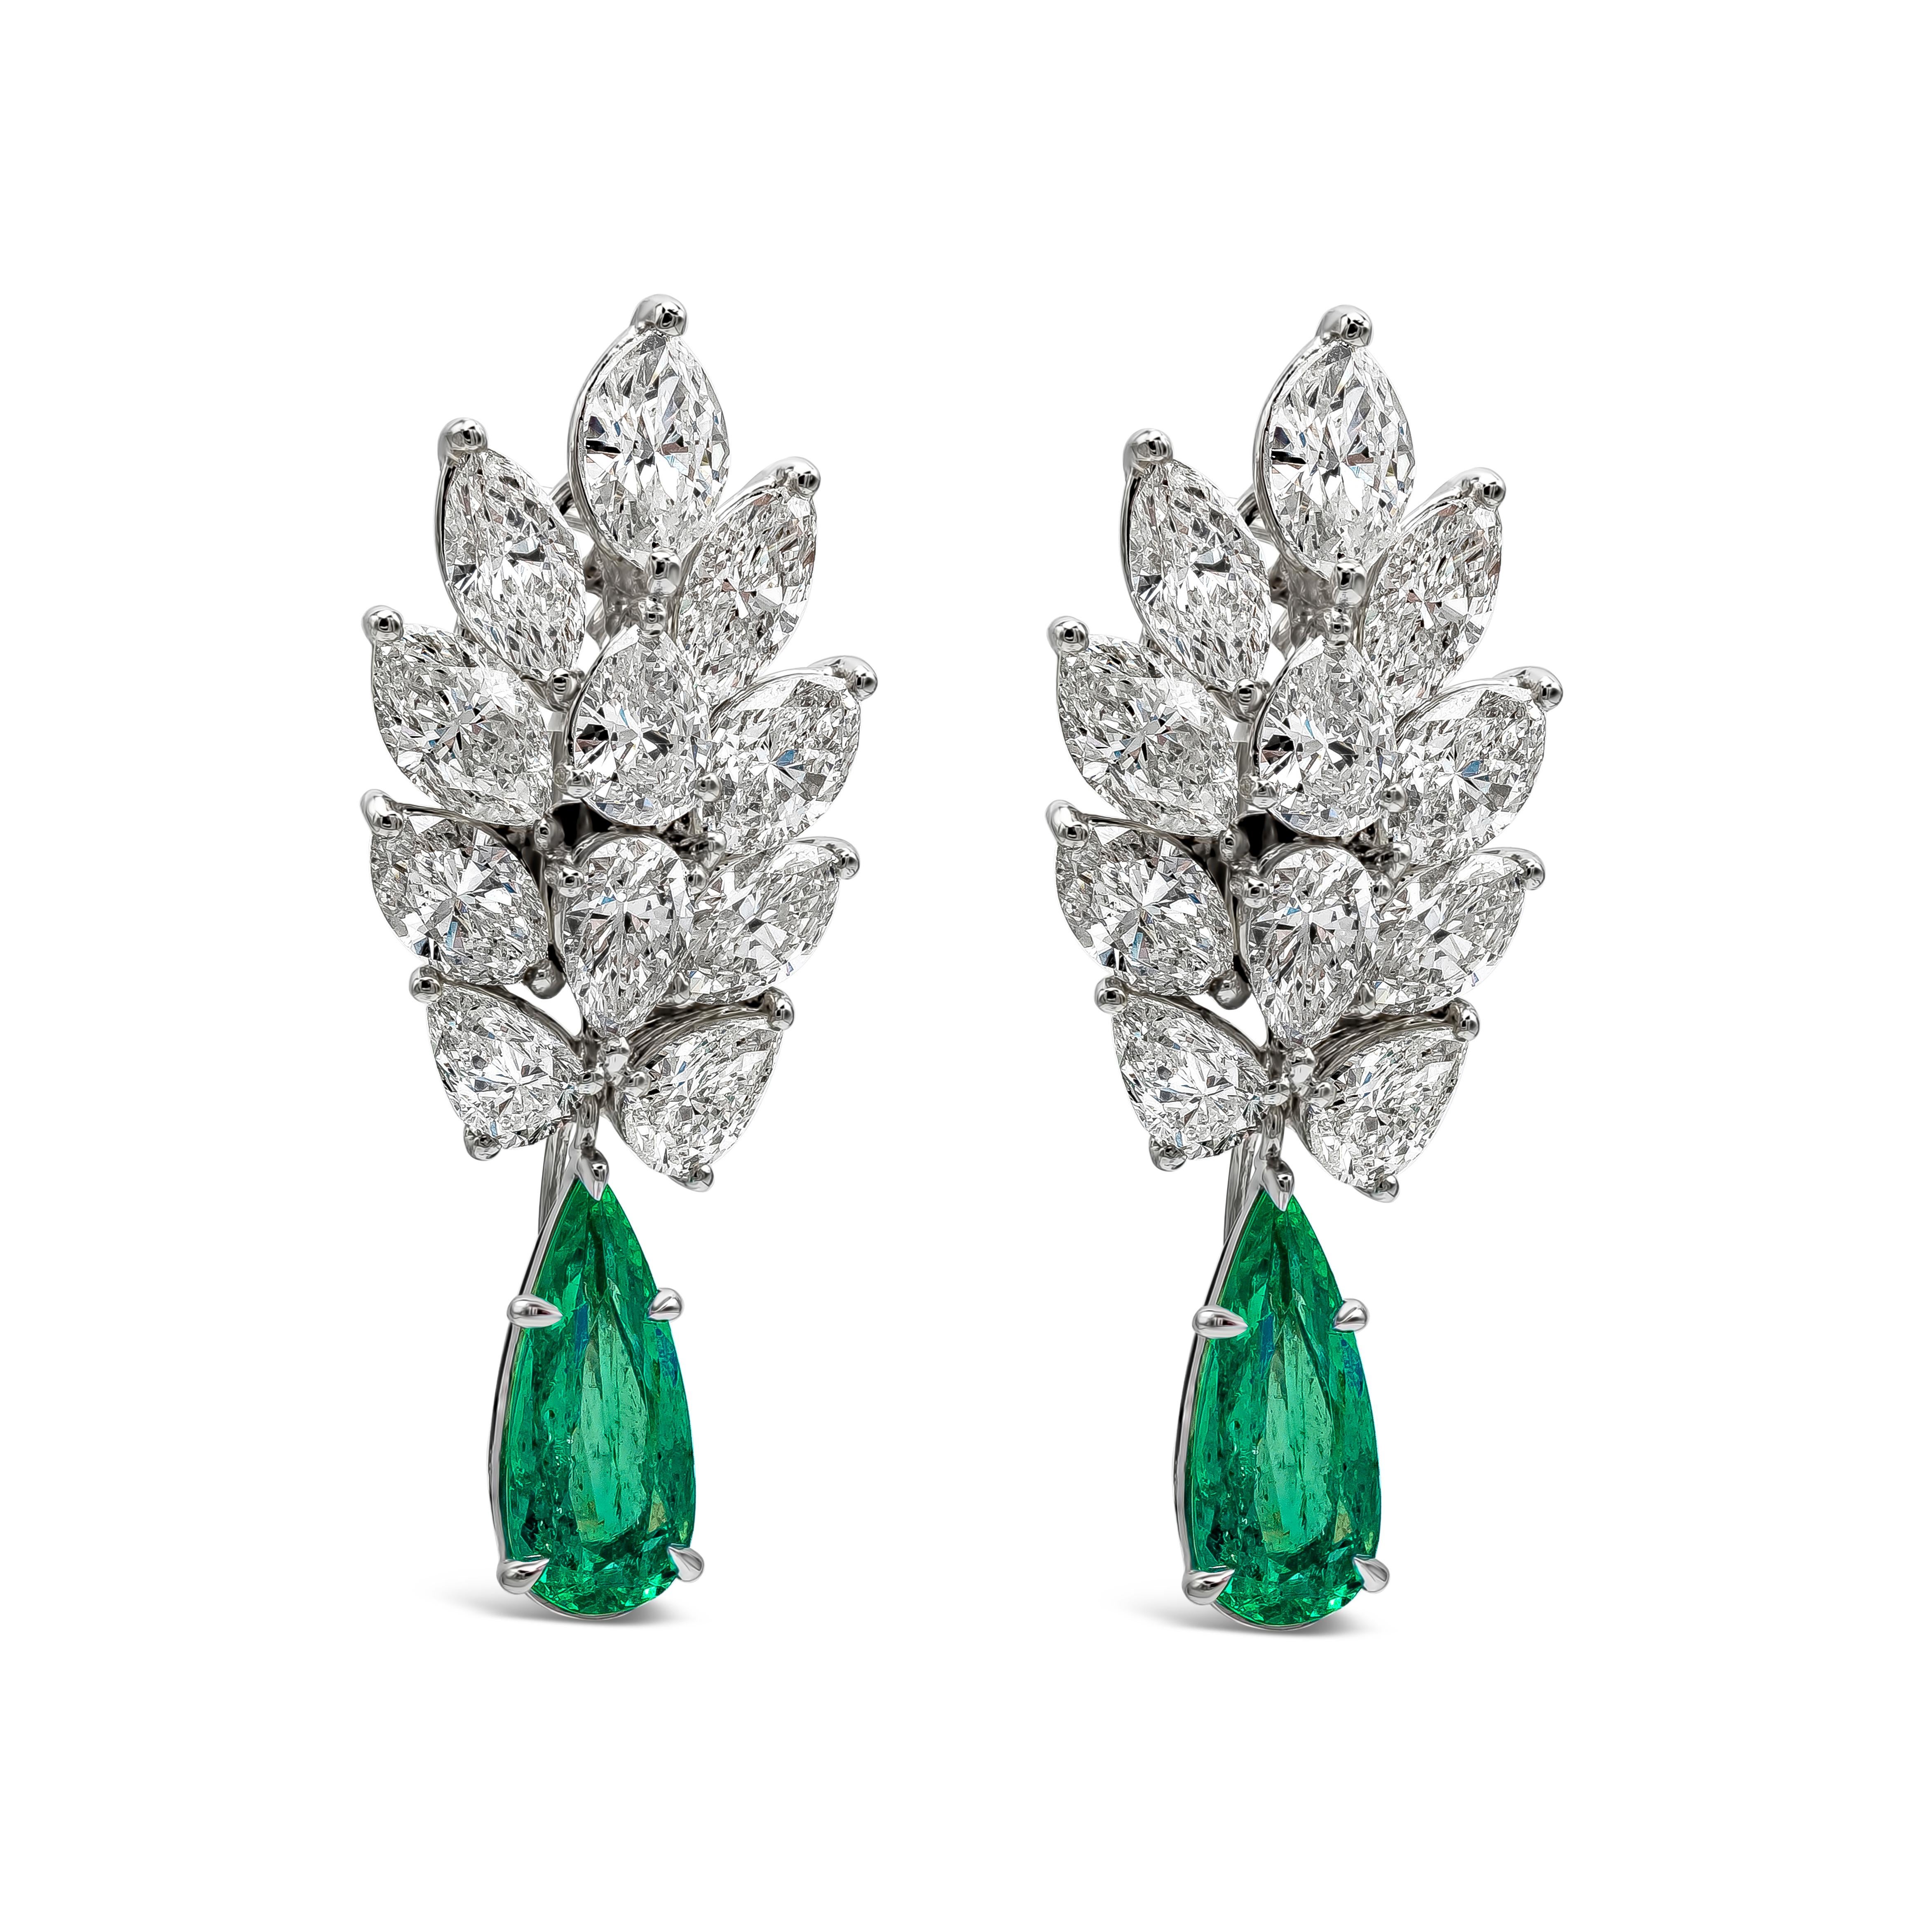 A sophisticated dangle earrings features a pear shape green emerald weighing 4.76 carats total, Elegantly set in a four prong basket setting and suspended on a cluster of pear and marquis shape diamonds weighing 15.40 carats total. Perfectly made in